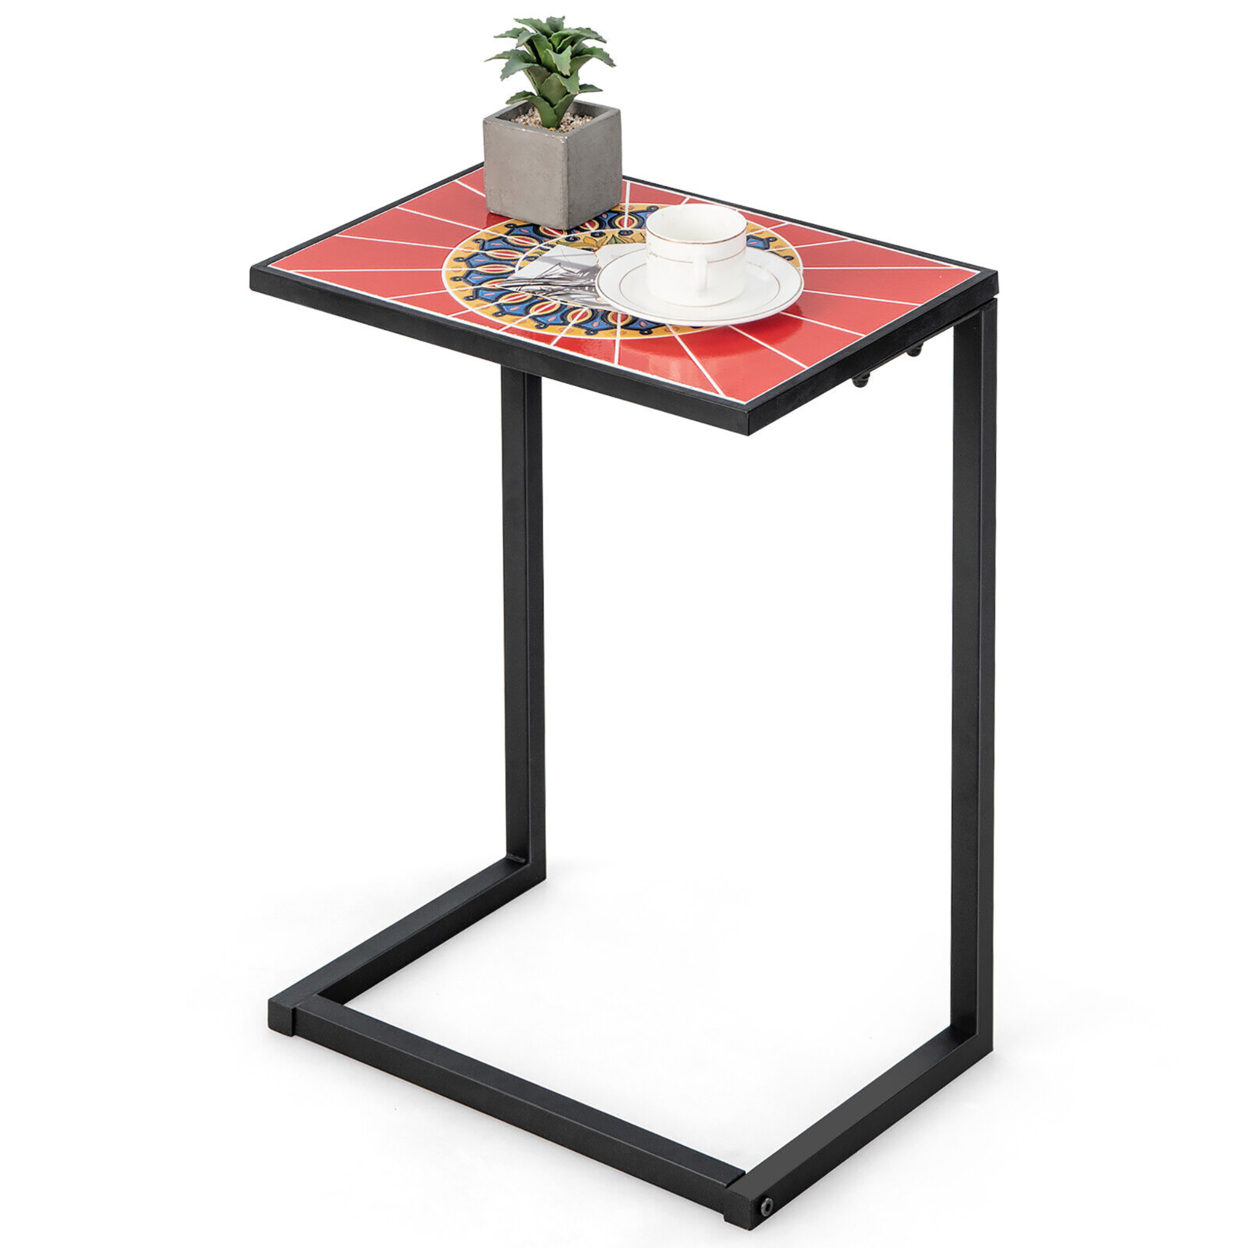 C-shaped Outdoor Side End Table W/ Ceramic Top For Patio Living Room Balcony